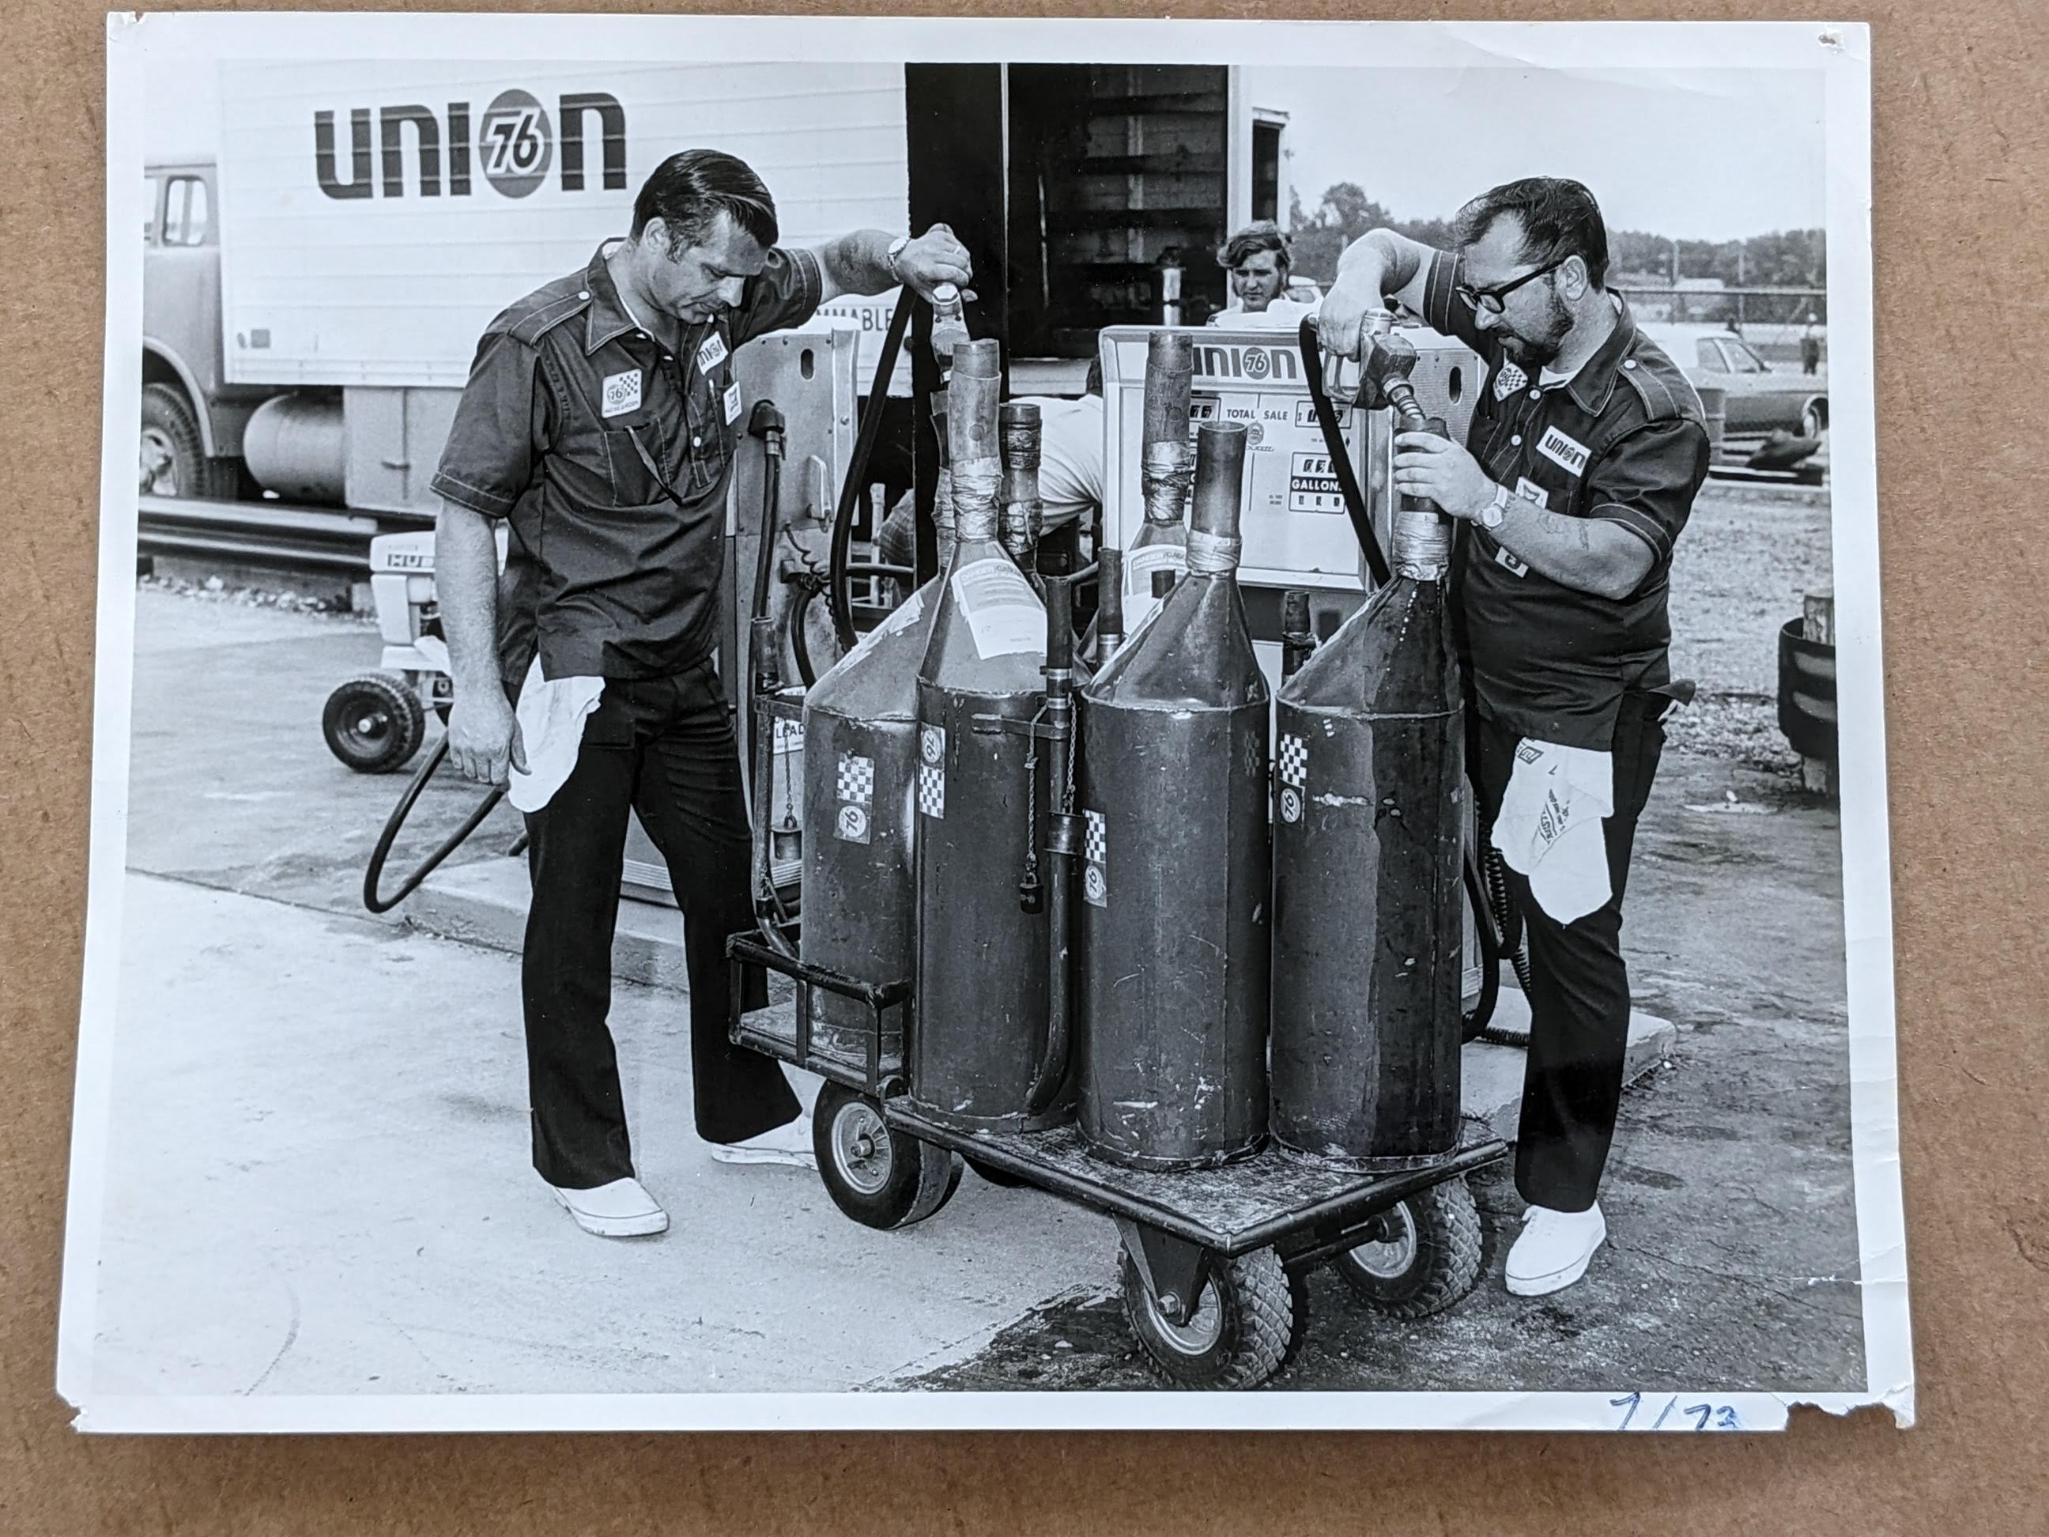 Race historians - Original vintage race photos of known cars (dragsters) and drivers from June 1961.